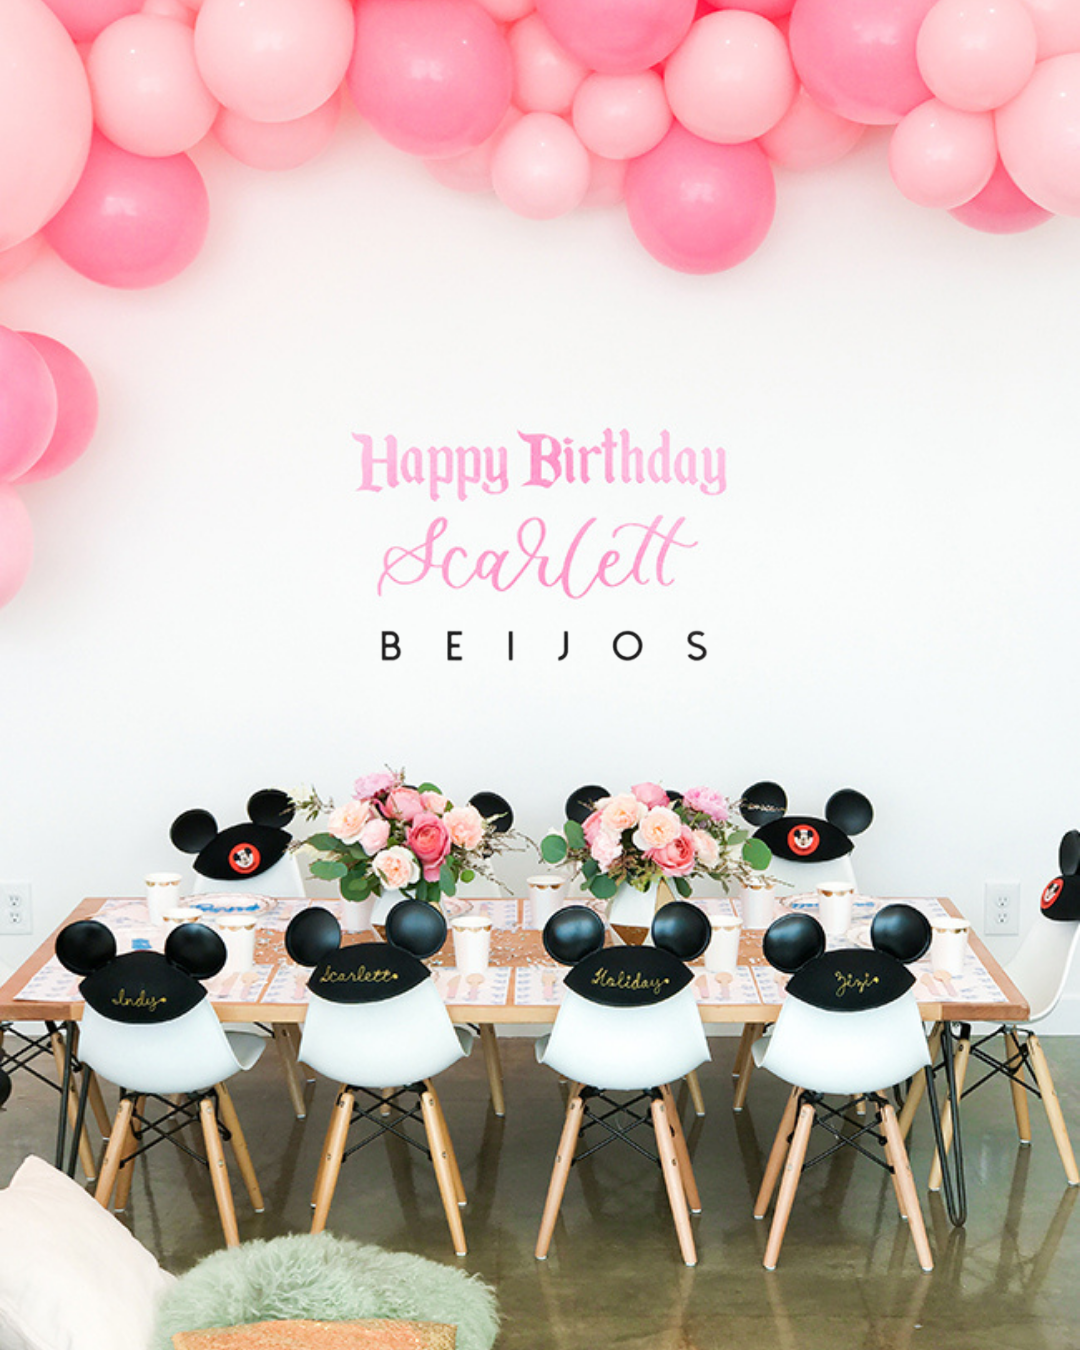 Sweet Table Decoration in Children`s Party with Minnie Mouse Theme  Editorial Stock Image - Image of decor, balloon: 177853314